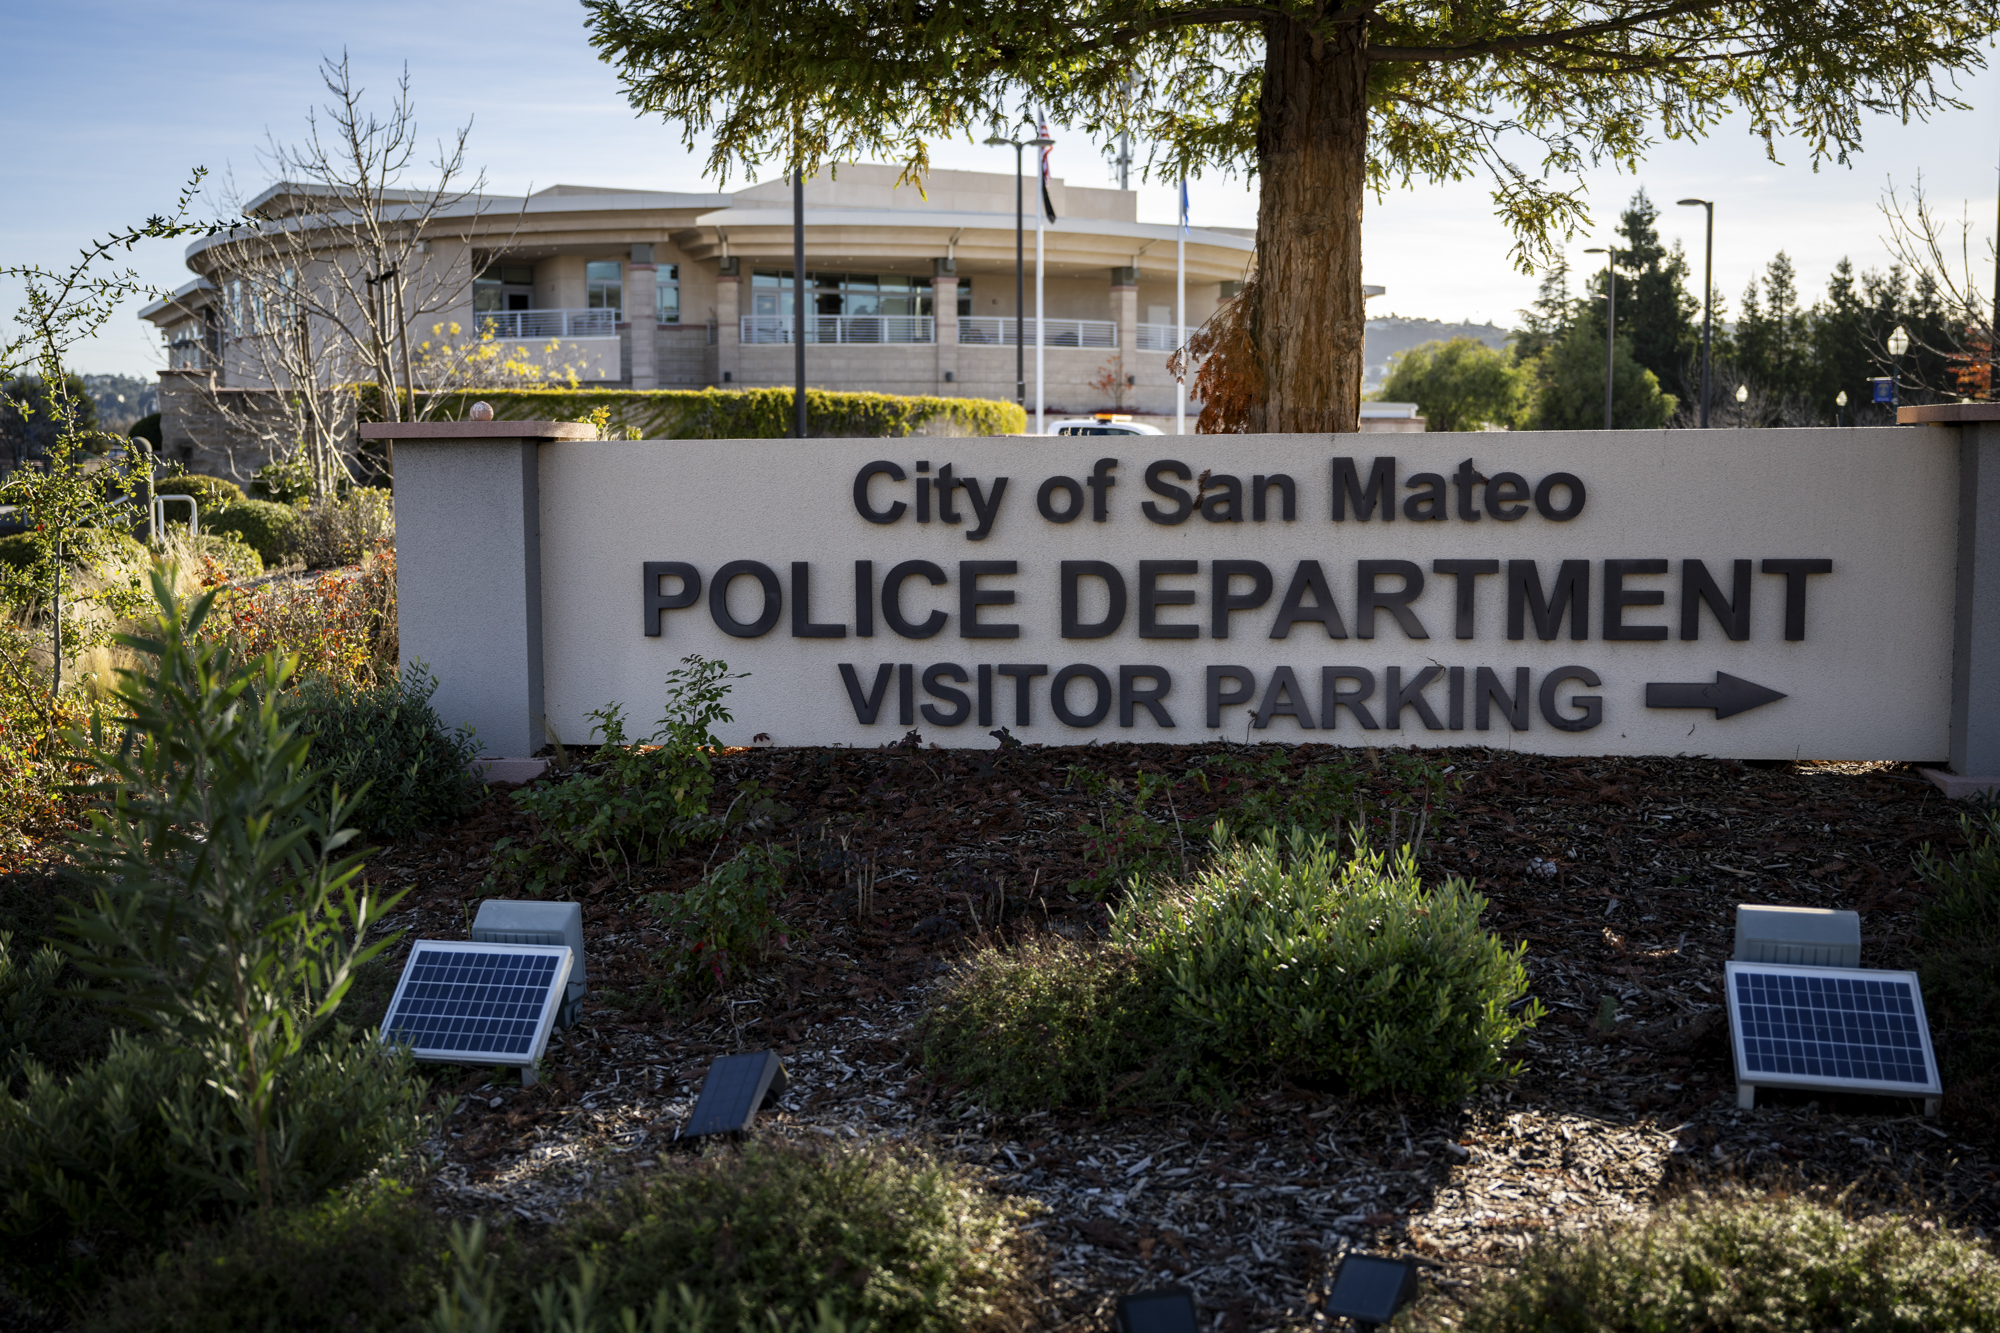 A sign outside a large building reads "City of San Mateo Police Department."